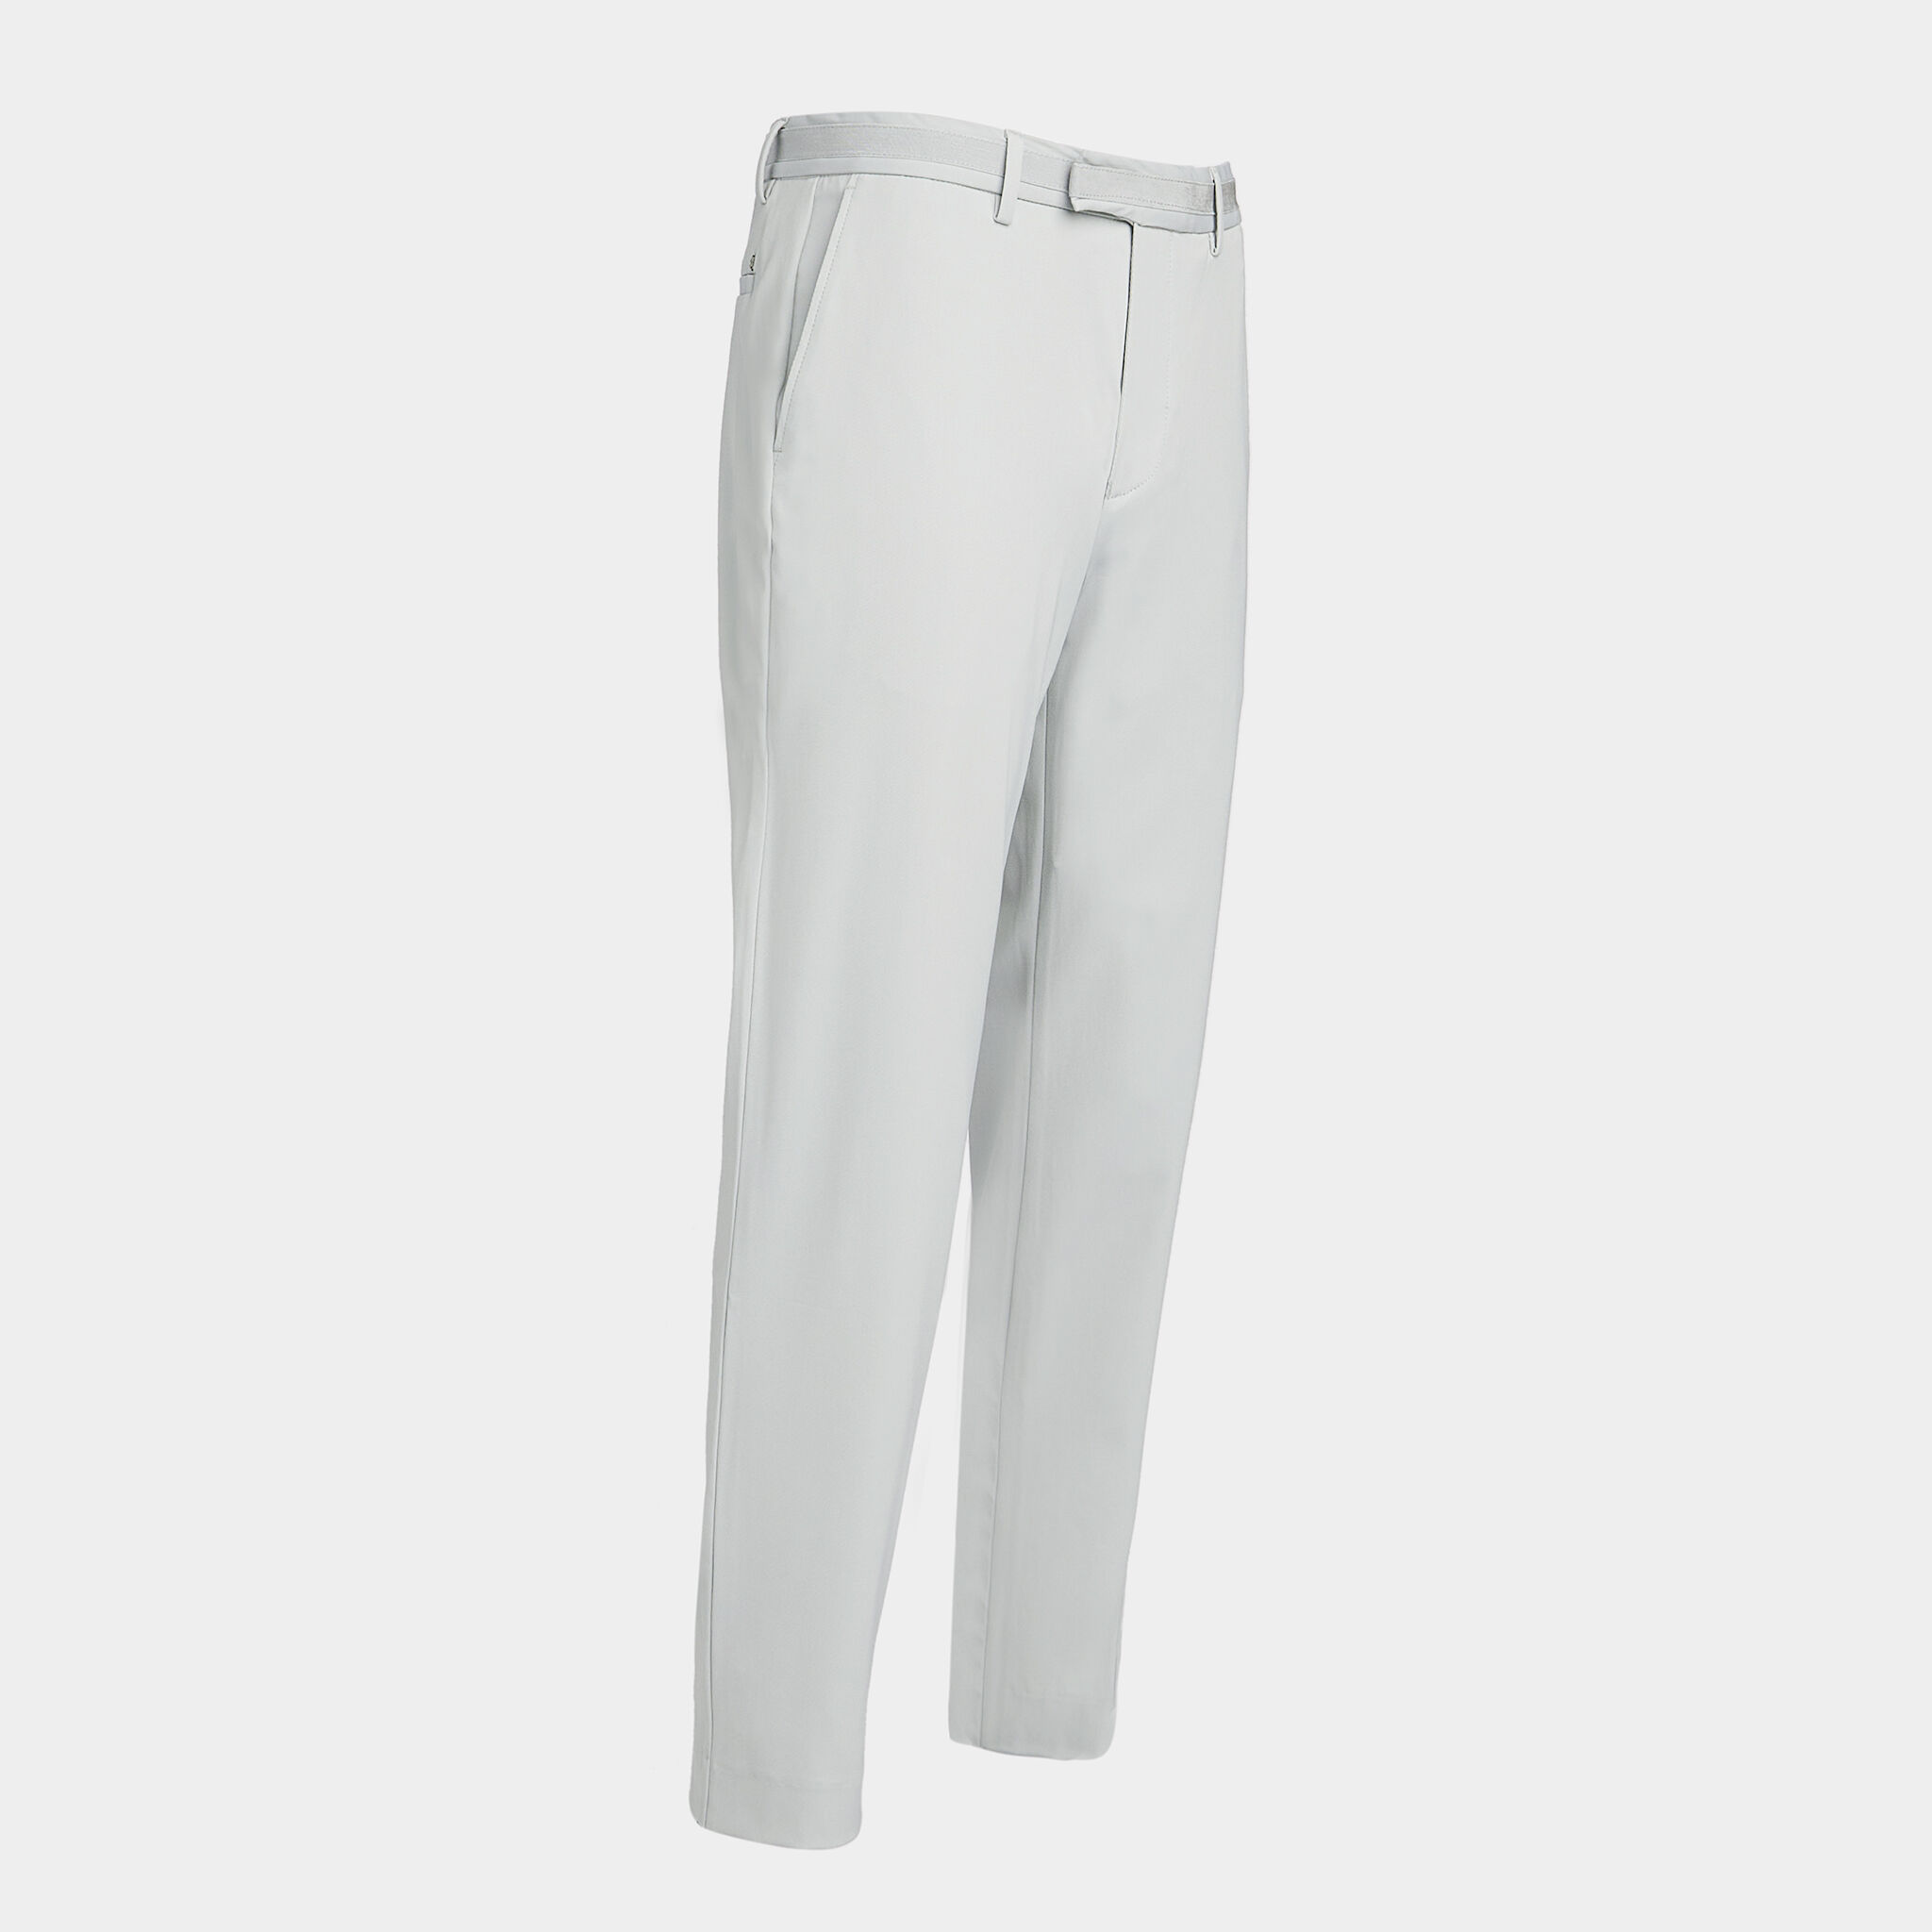 Men's Golf Trousers – Performance Golf Trousers for Men UK – G/FORE